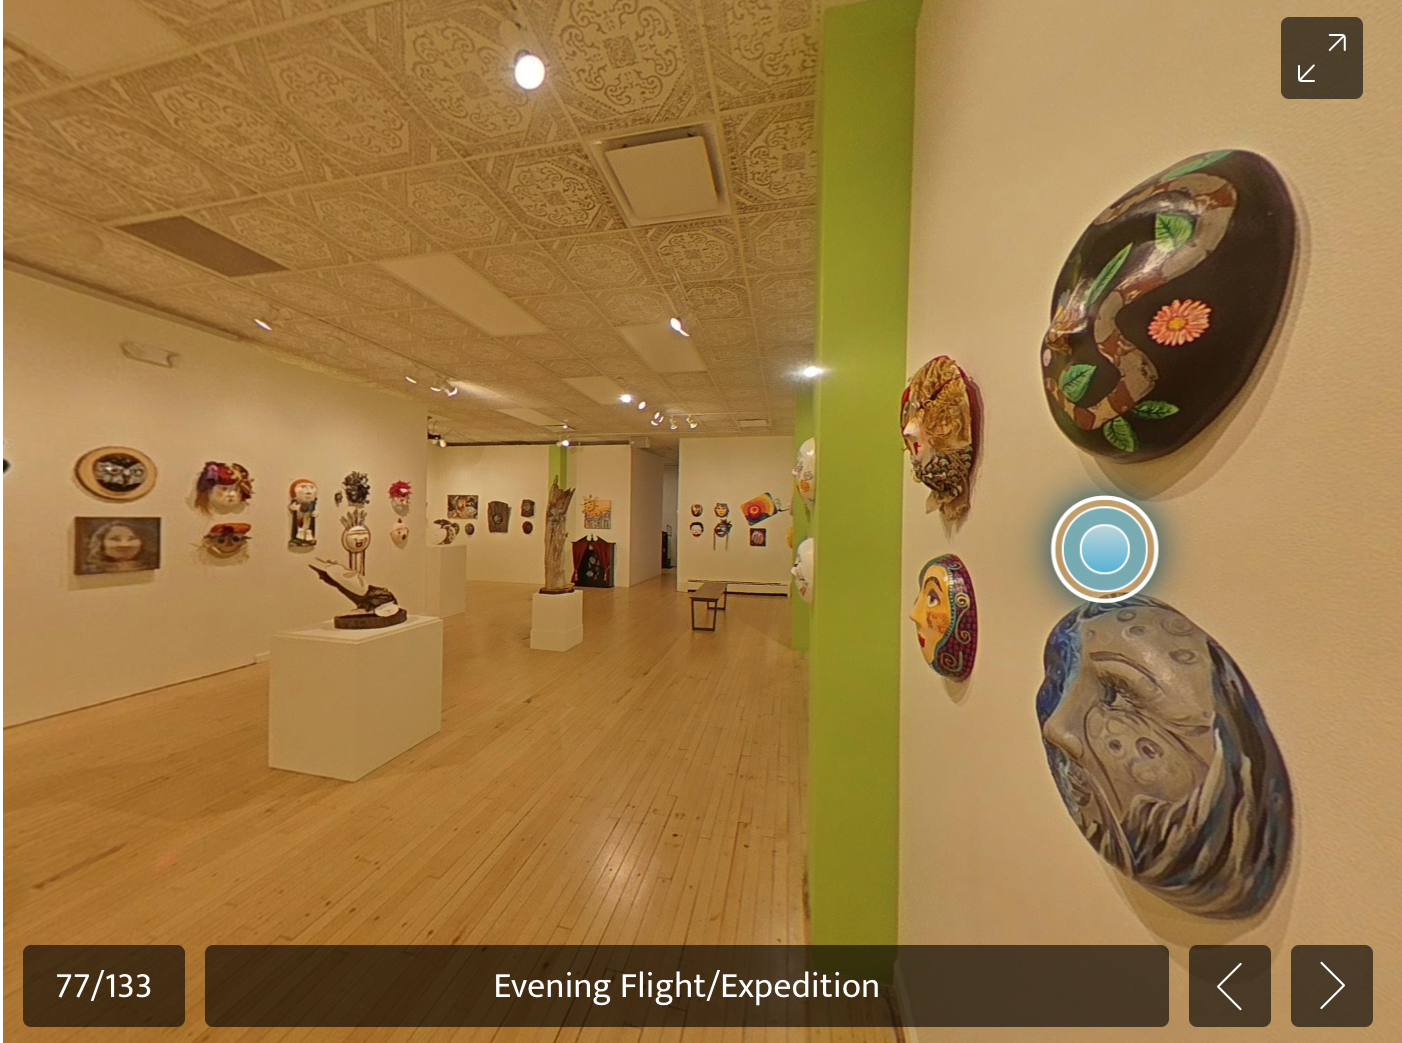 A screengrab shows a scene from the Museum of Art Fort Collins' virtual tour of its "Masks" exhibition and auction.